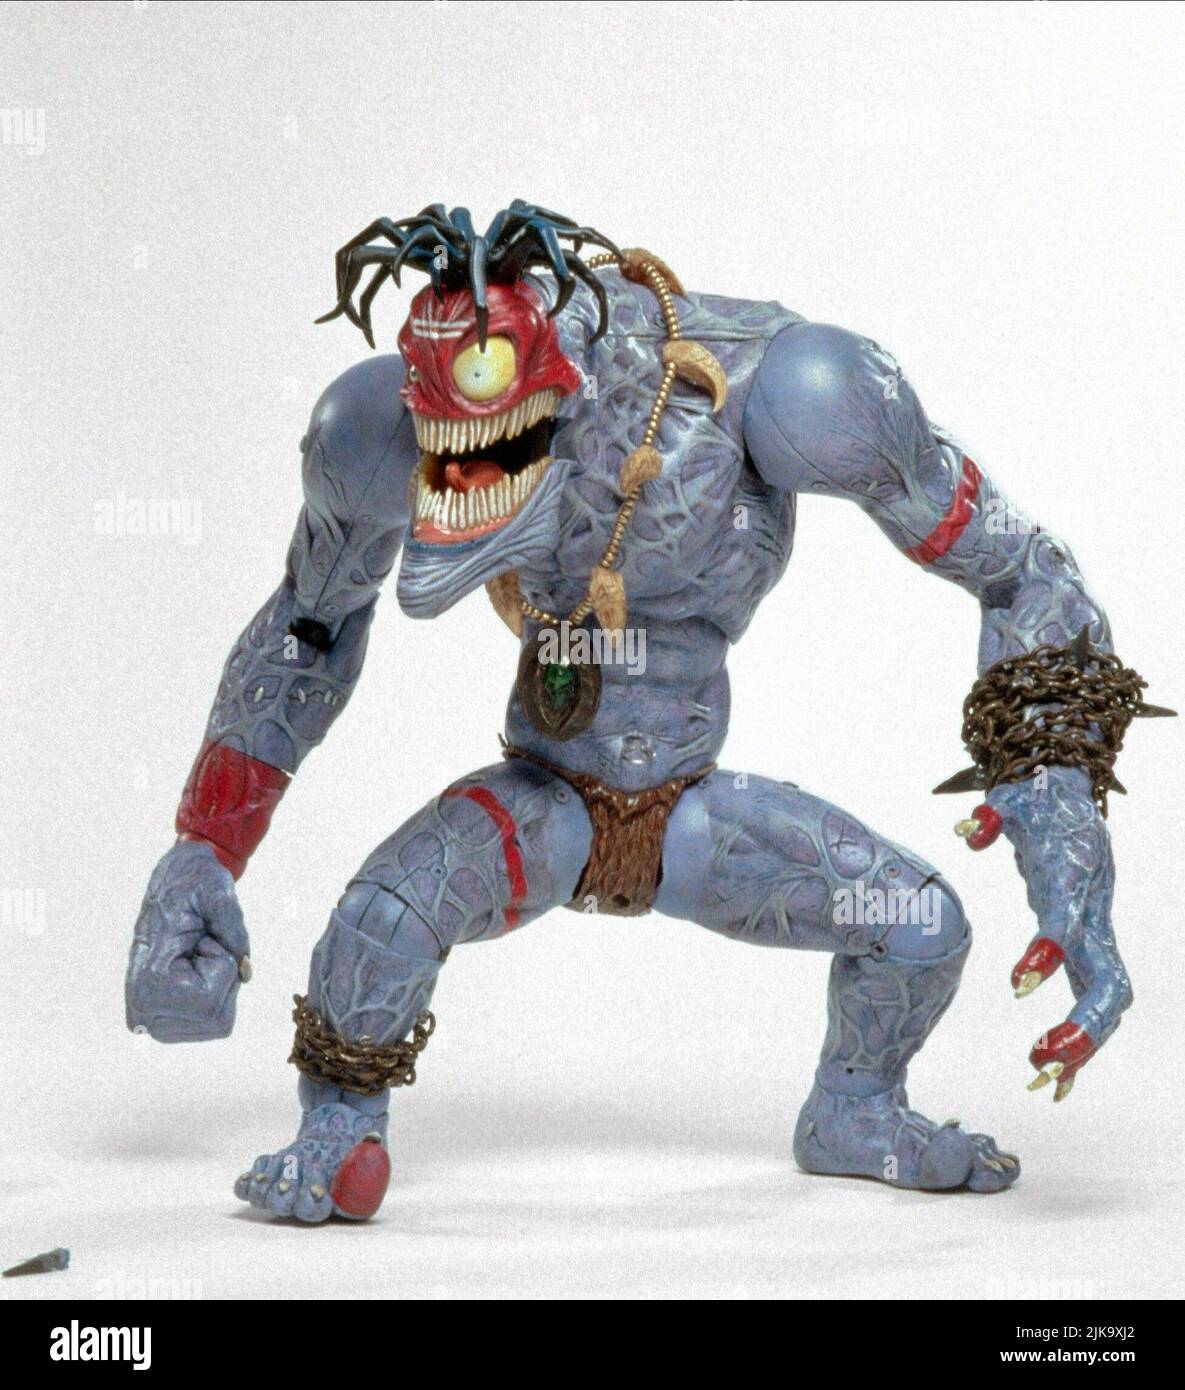 monster-film-small-soldiers-1998-director-joe-dante-10-july-1998-warning-this-photograph-is-for-editorial-use-only-and-is-the-copyright-of-universal-andor-the-photographer-assigned-by-the-film-or-production-company-and-can-only-be-reproduced-by-publications-in-conjunction-with-the-promotion-of-the-above-film-a-mandatory-credit-to-universal-is-required-the-photographer-should-also-be-credited-when-known-no-commercial-use-can-be-granted-without-written-authority-from-the-film-company-2JK9XJ2.jpg